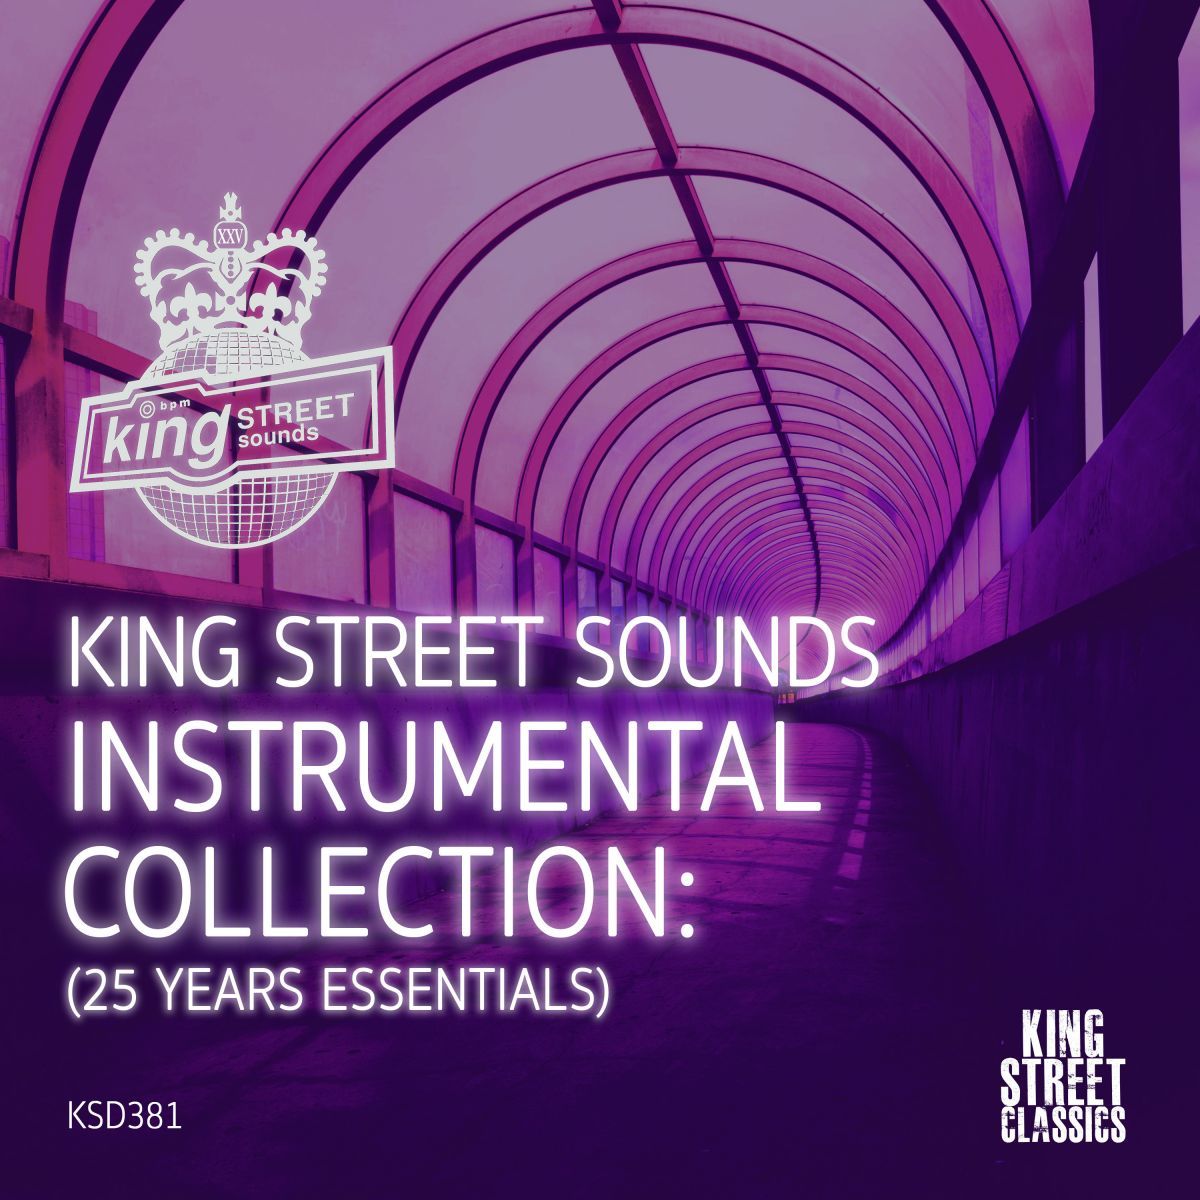 VA - King Street Sounds Instrumental Collection (25 Years Essentials) / King Street Classics